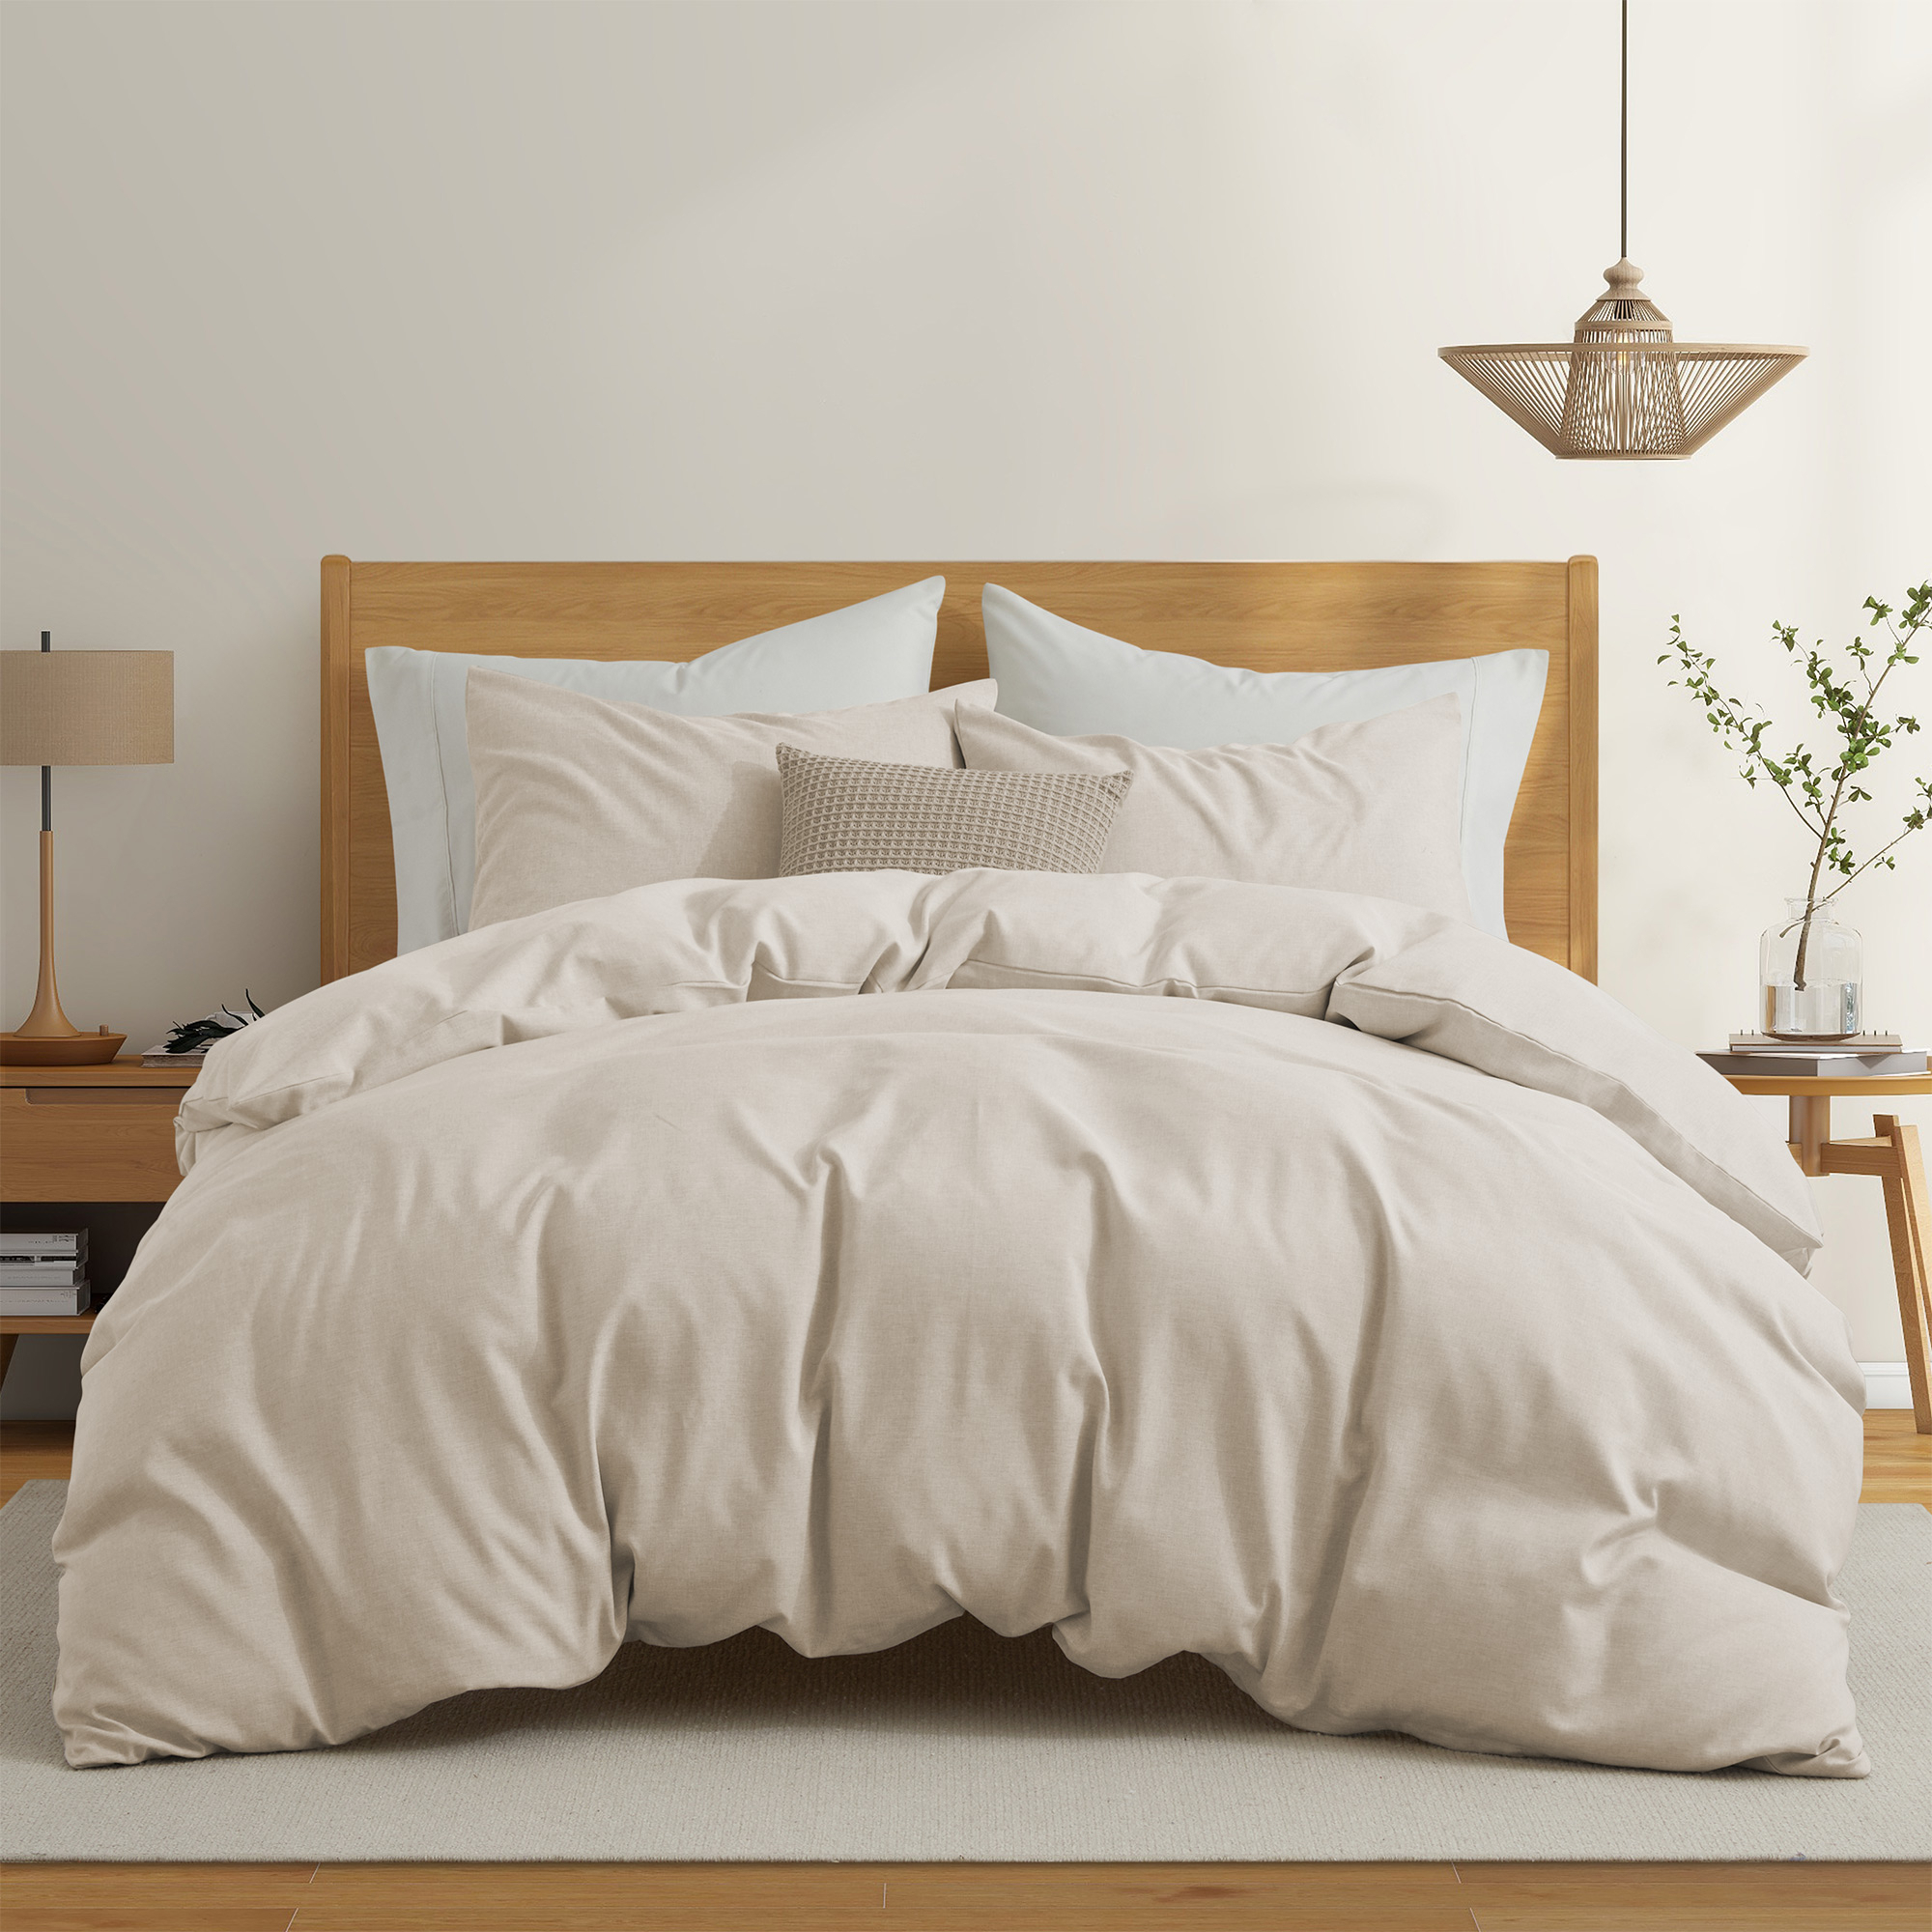 Solid Faux Linen Duvet Cover Set With Shams - Luxurious Comfort - Cream, Full/Queen-90x90